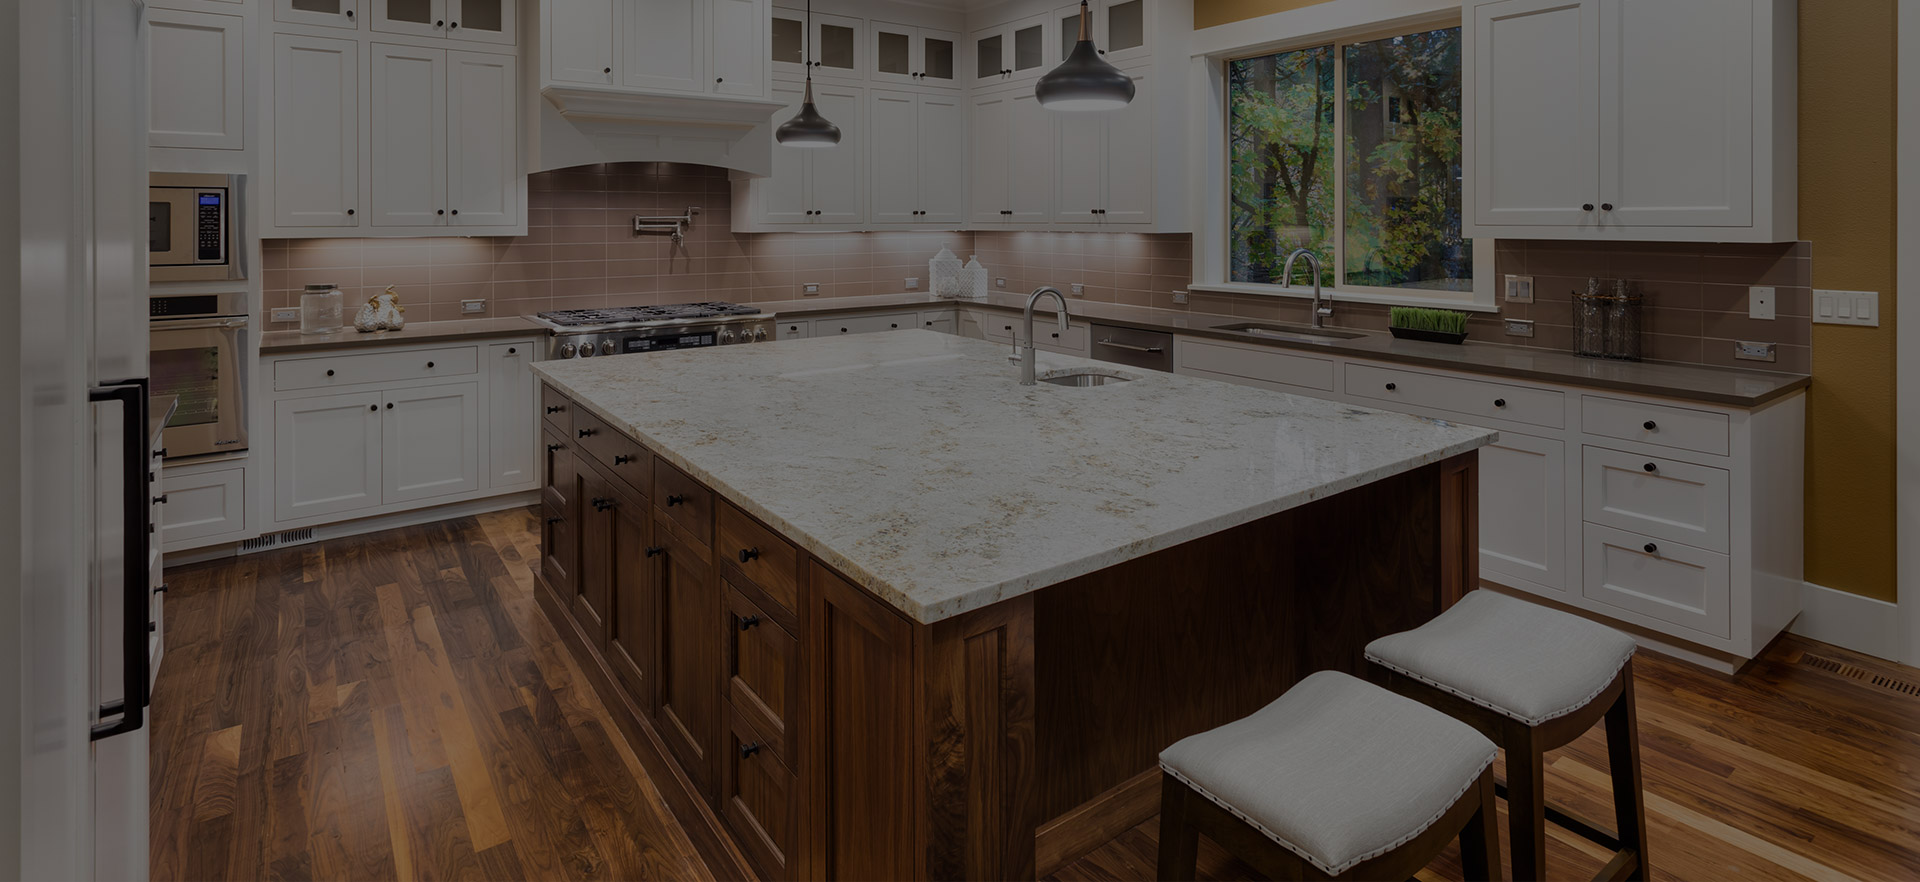 Get a Quote on Custom Countertops